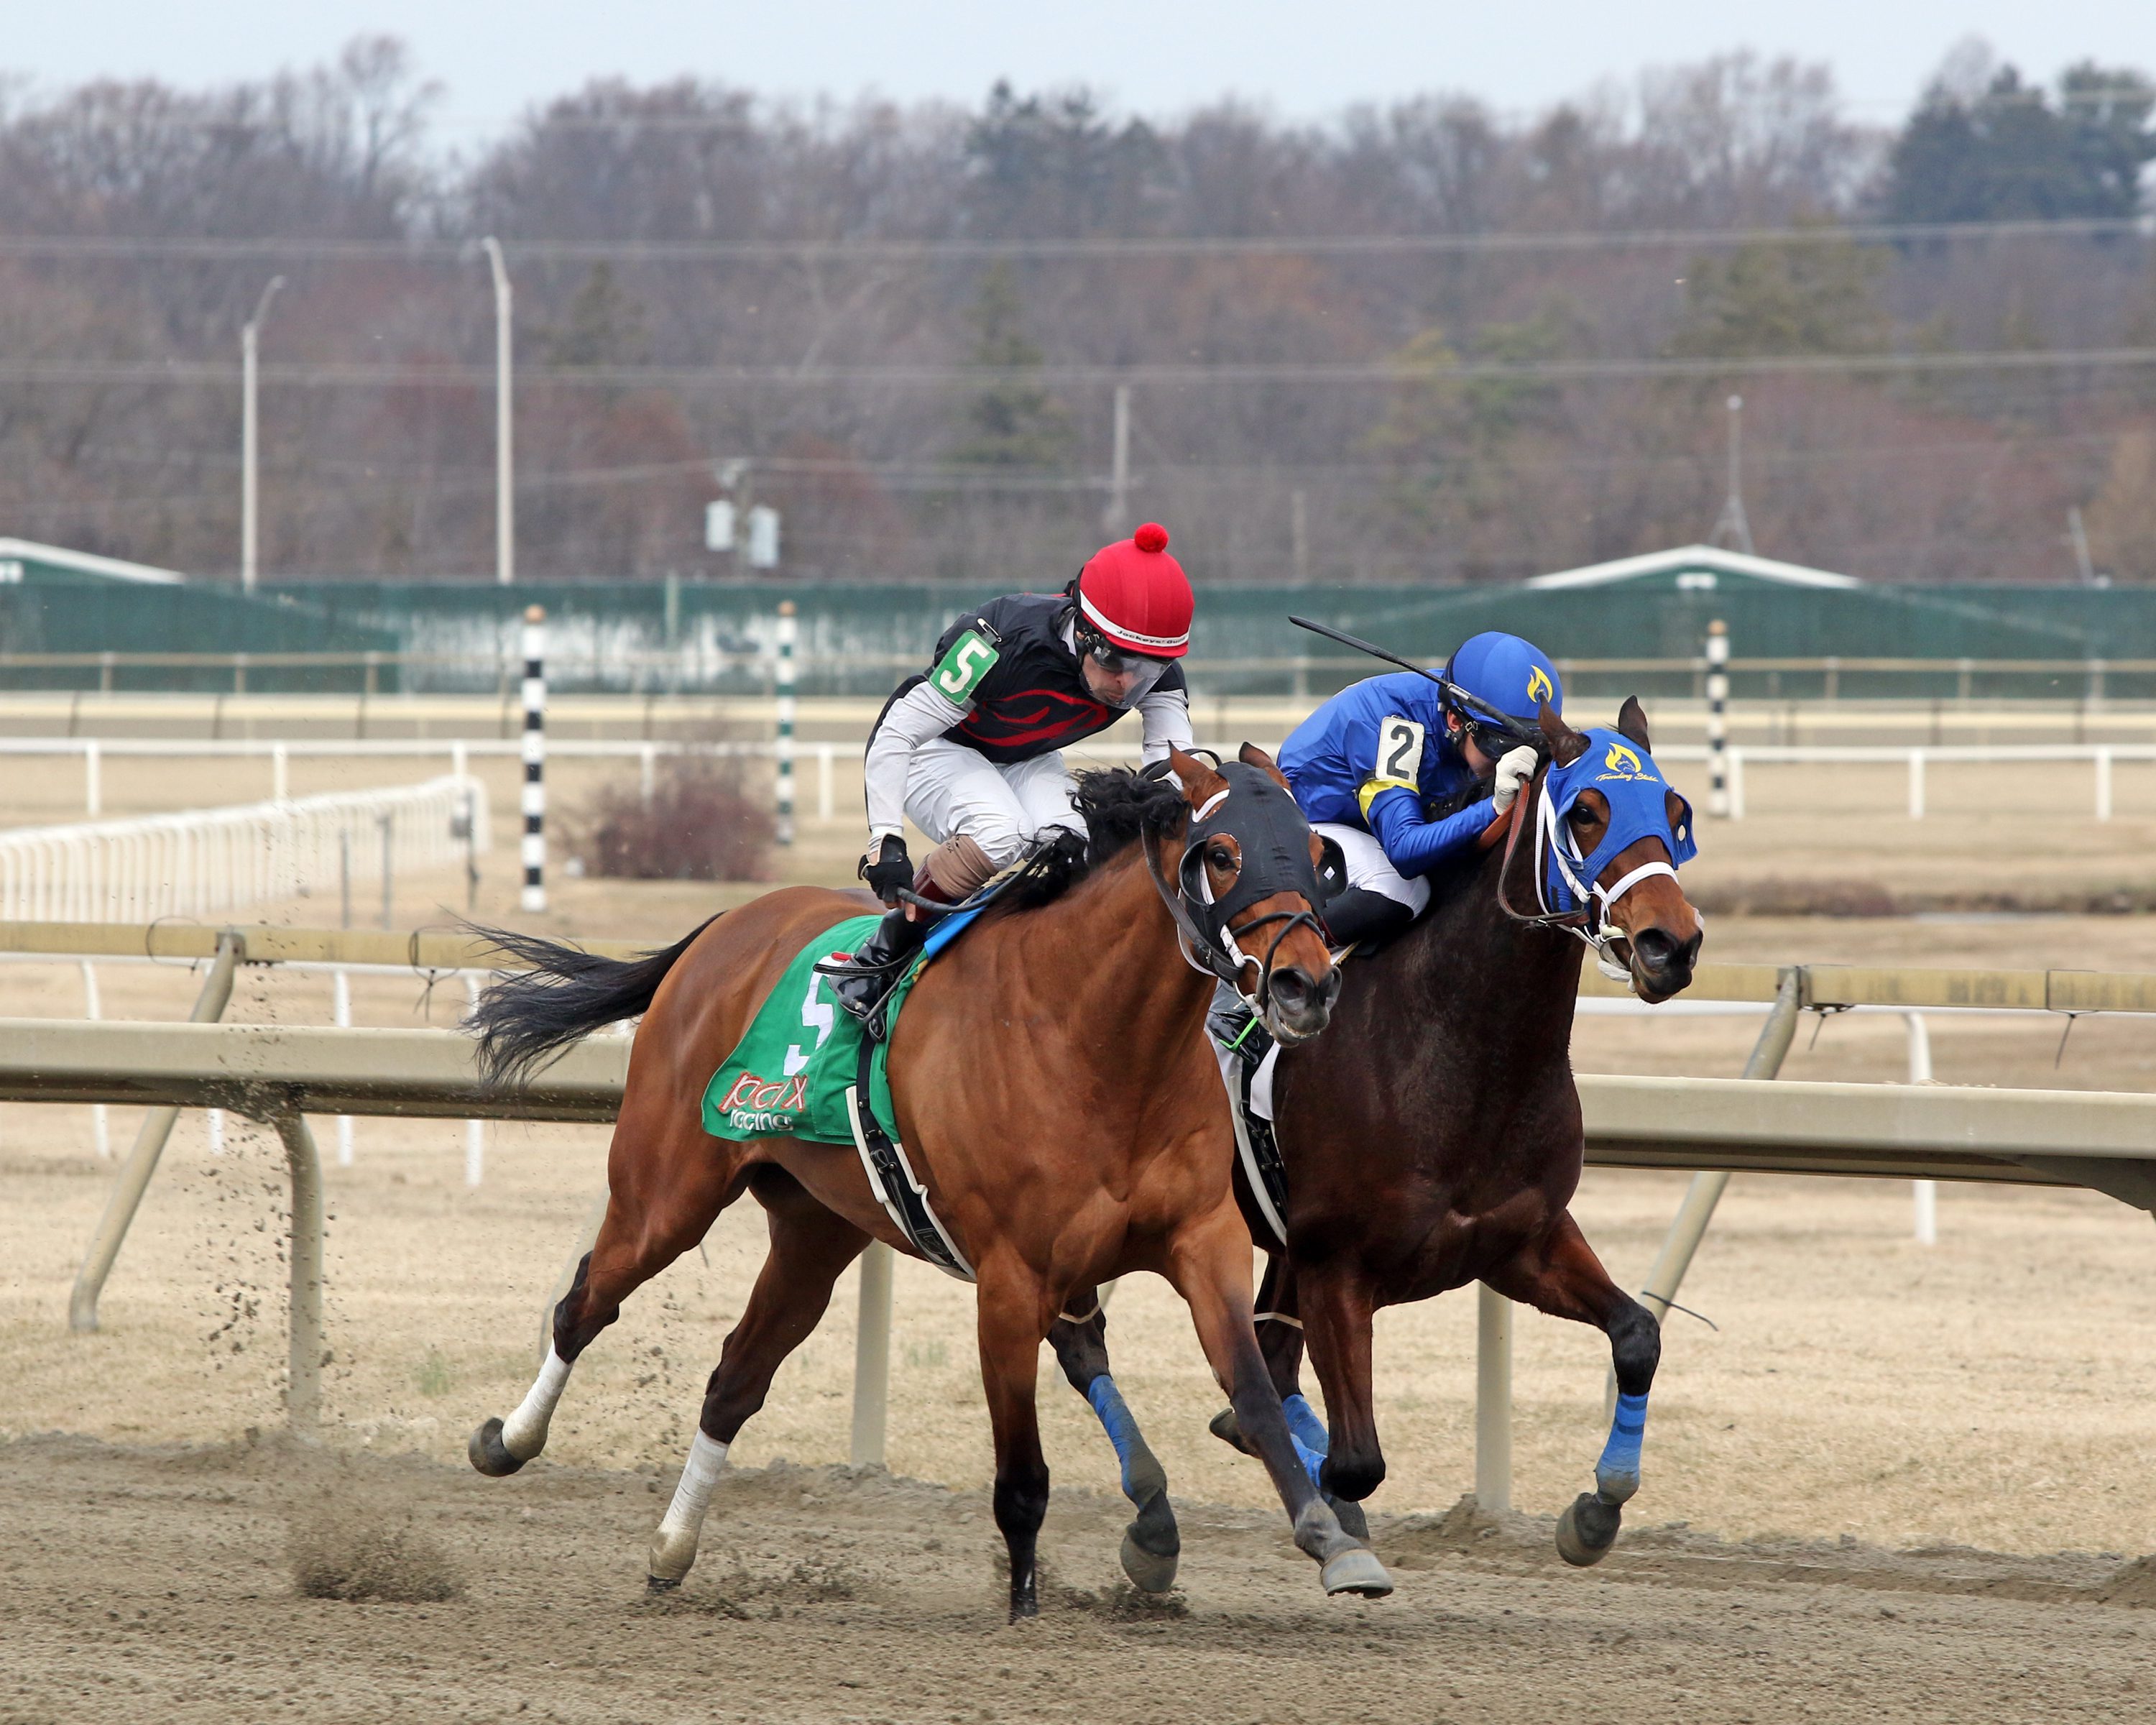 Gypsy Janie #5 with Ruben Silvera and Dreaming Diamonds #2 with Antonio Gomez in the stretch of Race 1 at Parx on March 7, 2022. Photo By: Chad B. Harmon